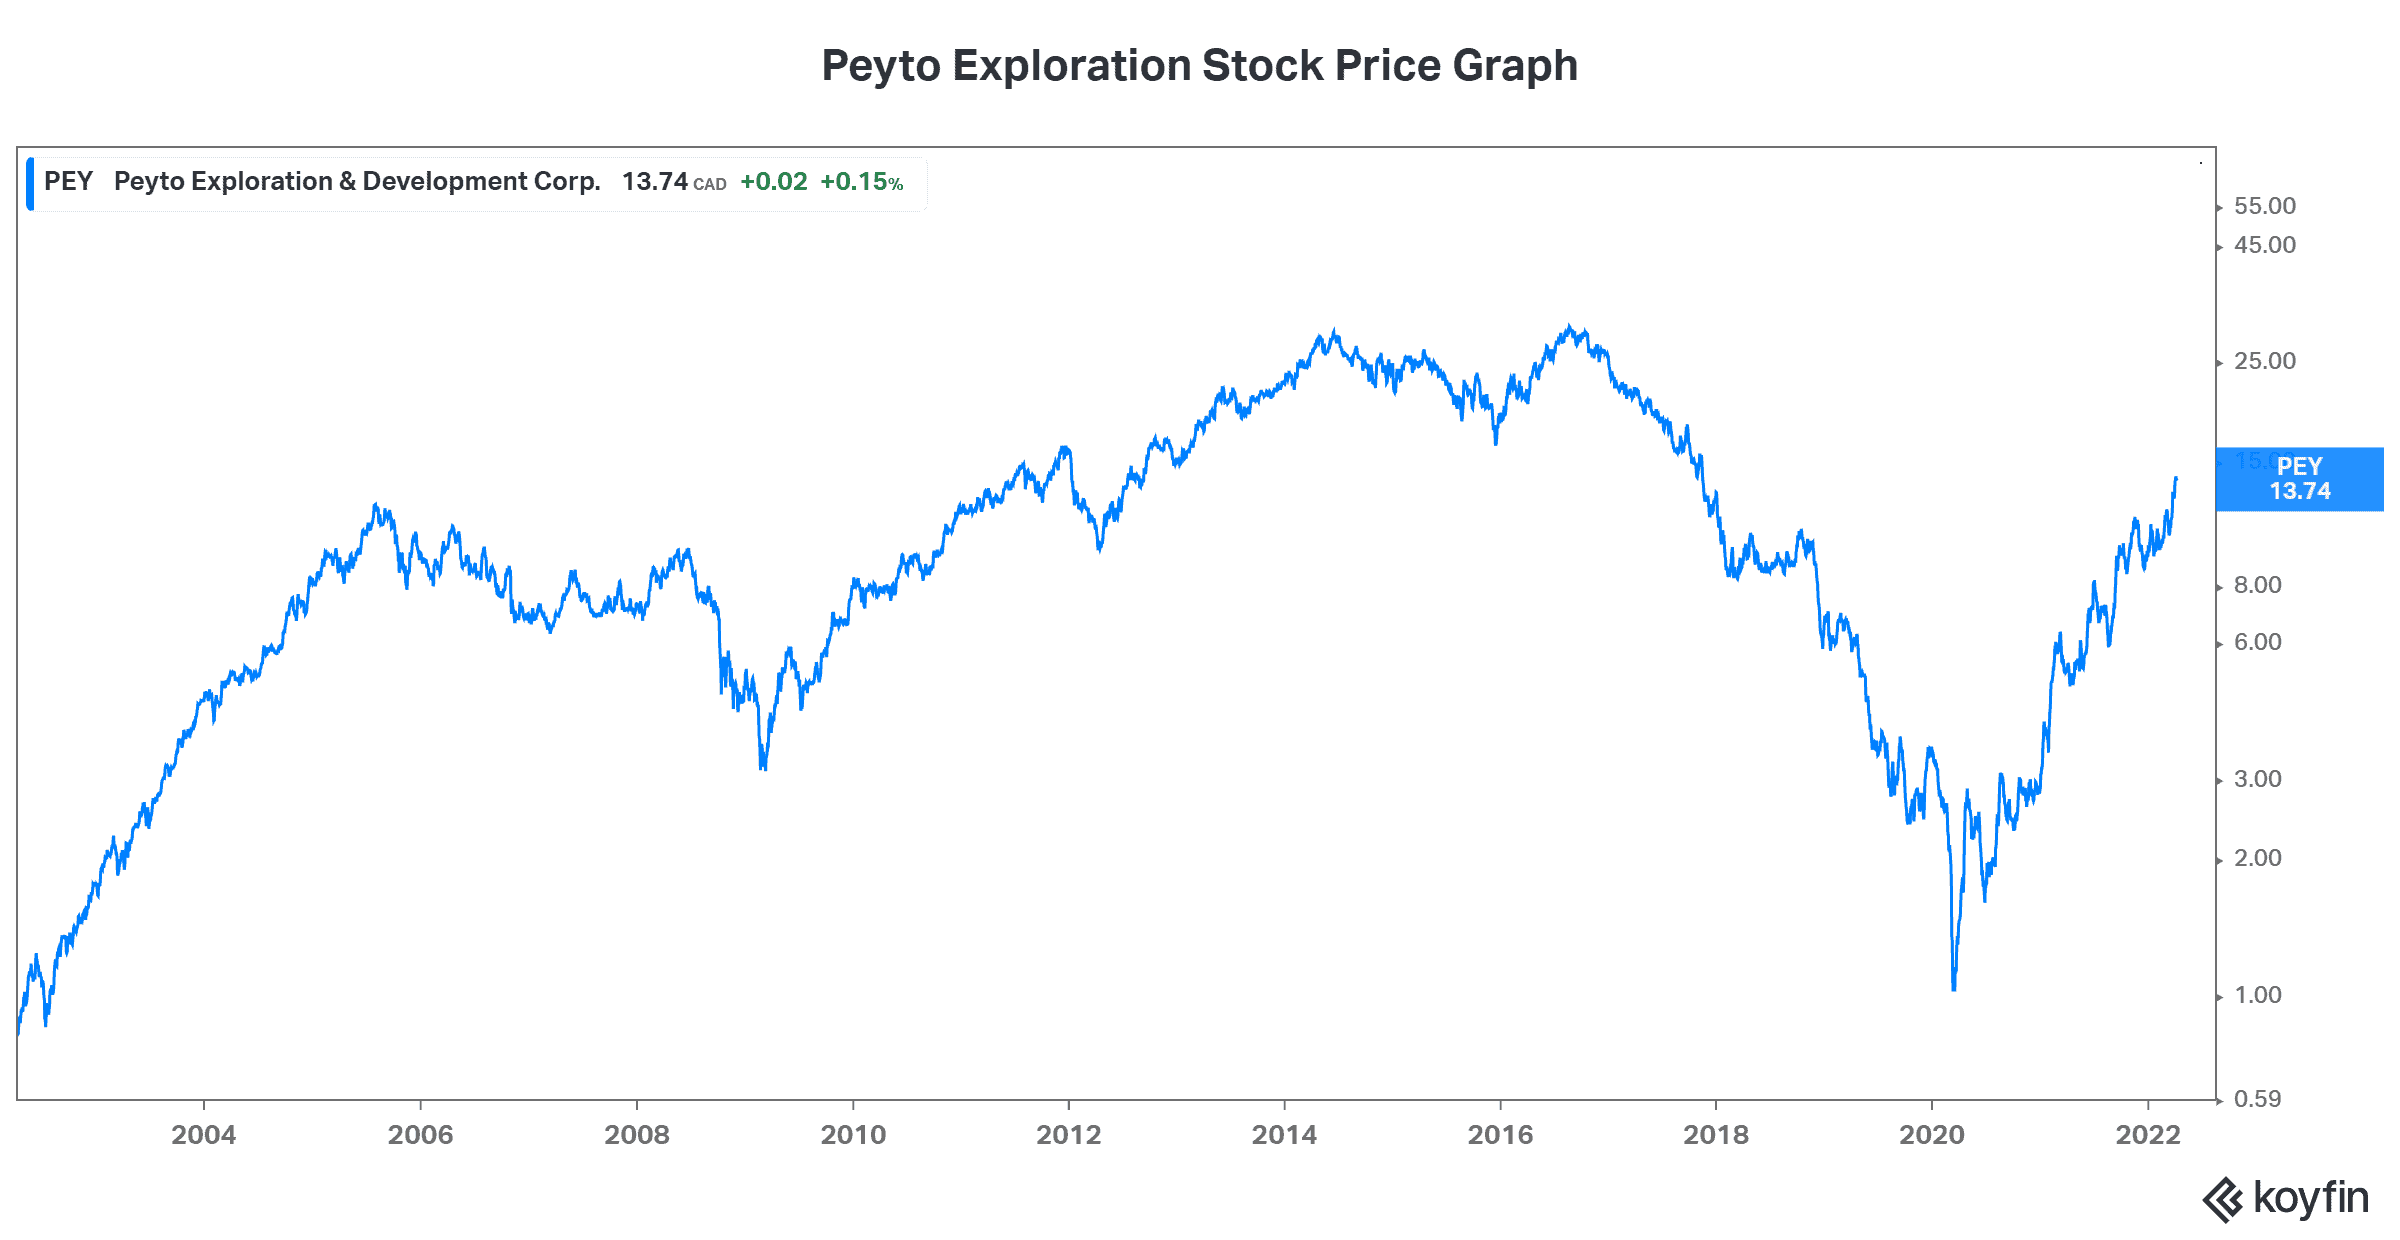 Peyto Dividend stock energy stock